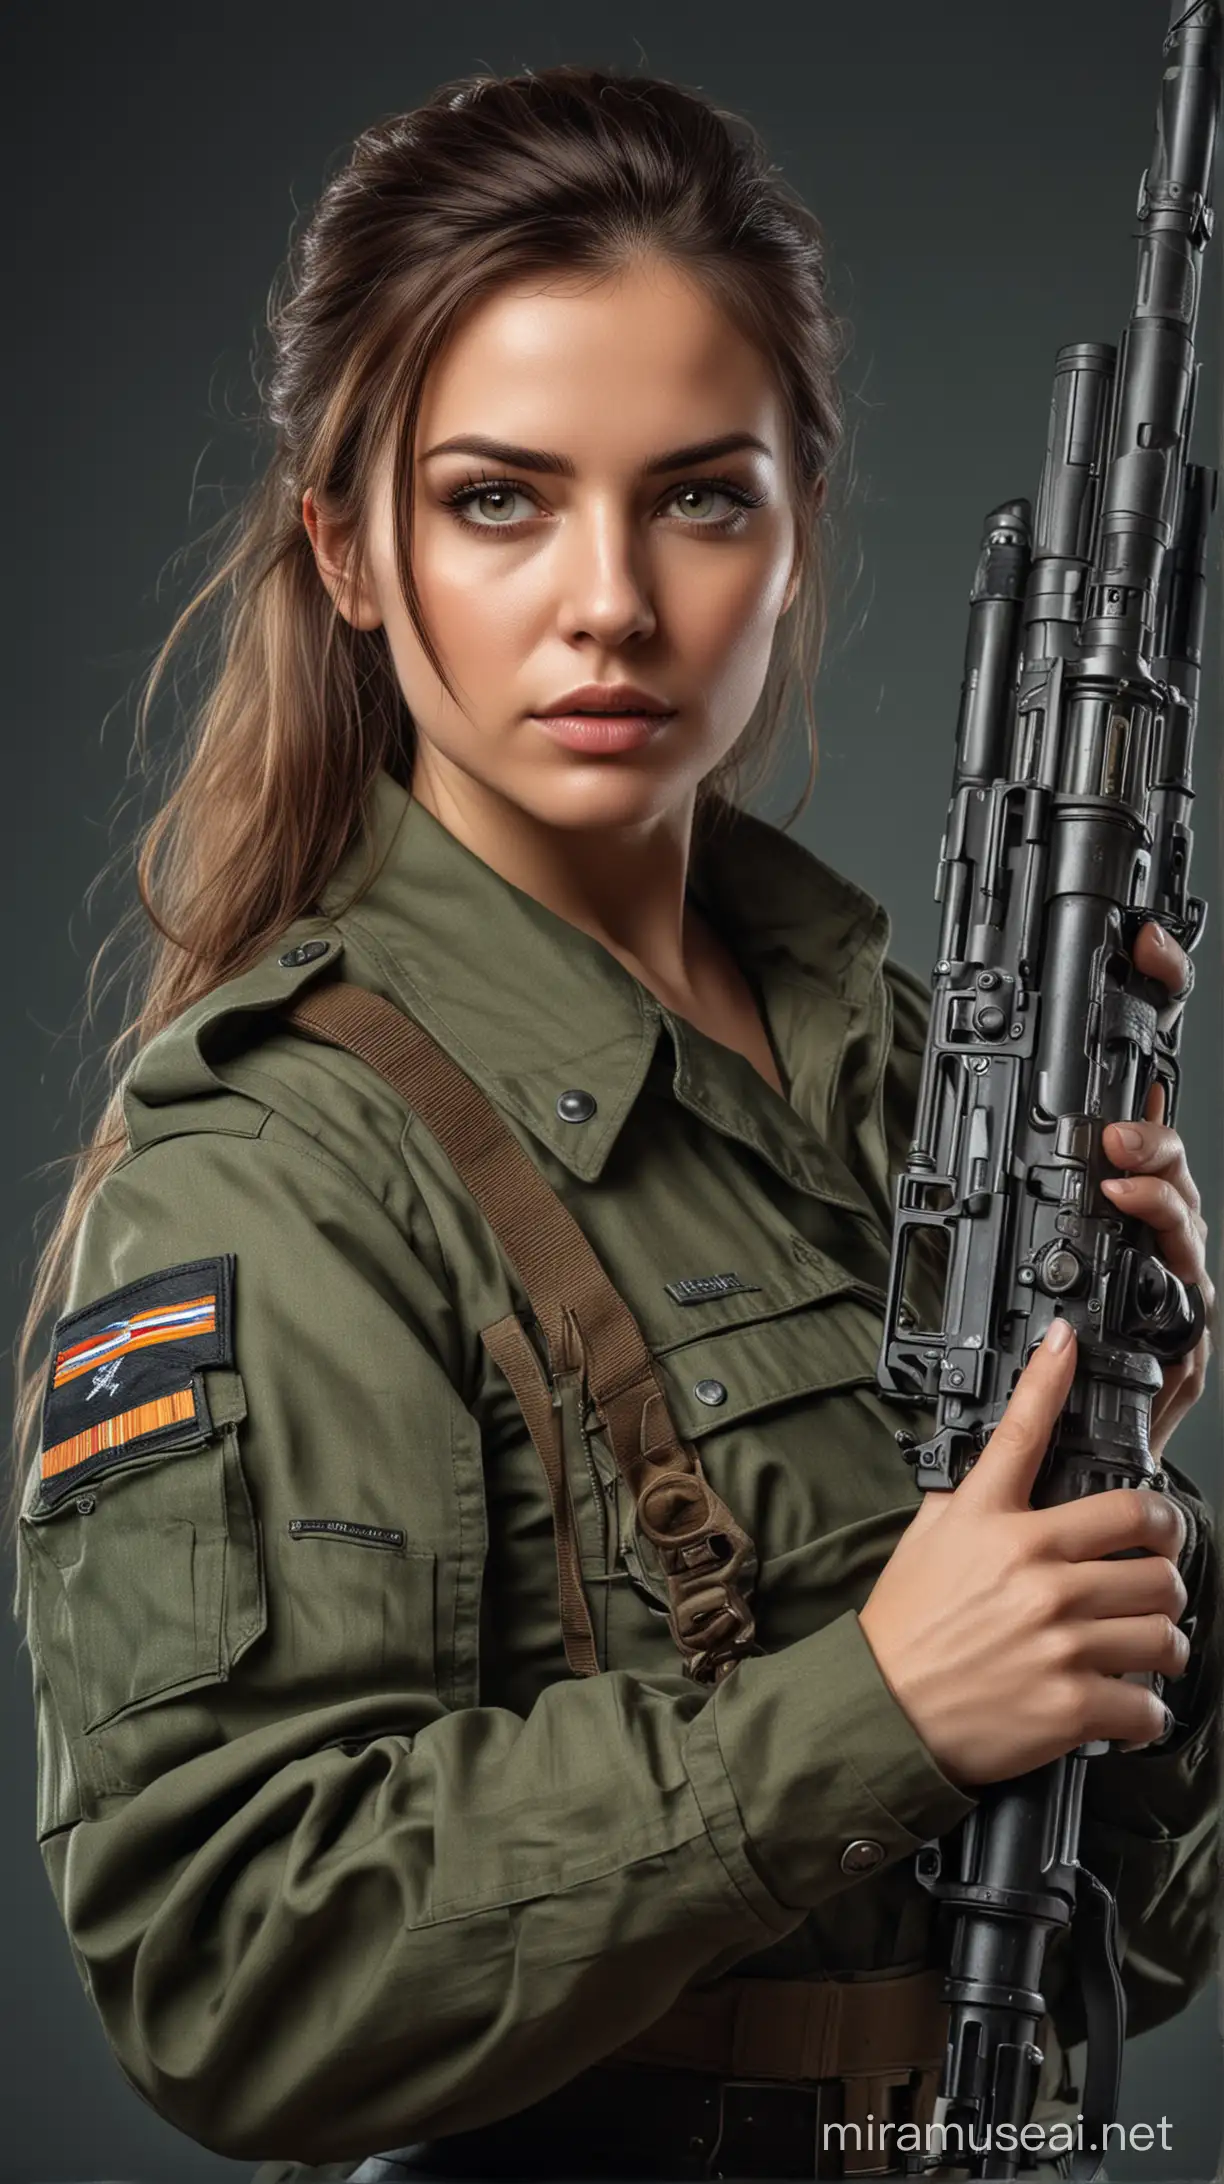 realistic portrait of a beautiful woman in military uniform with a powerful weapon in her hands